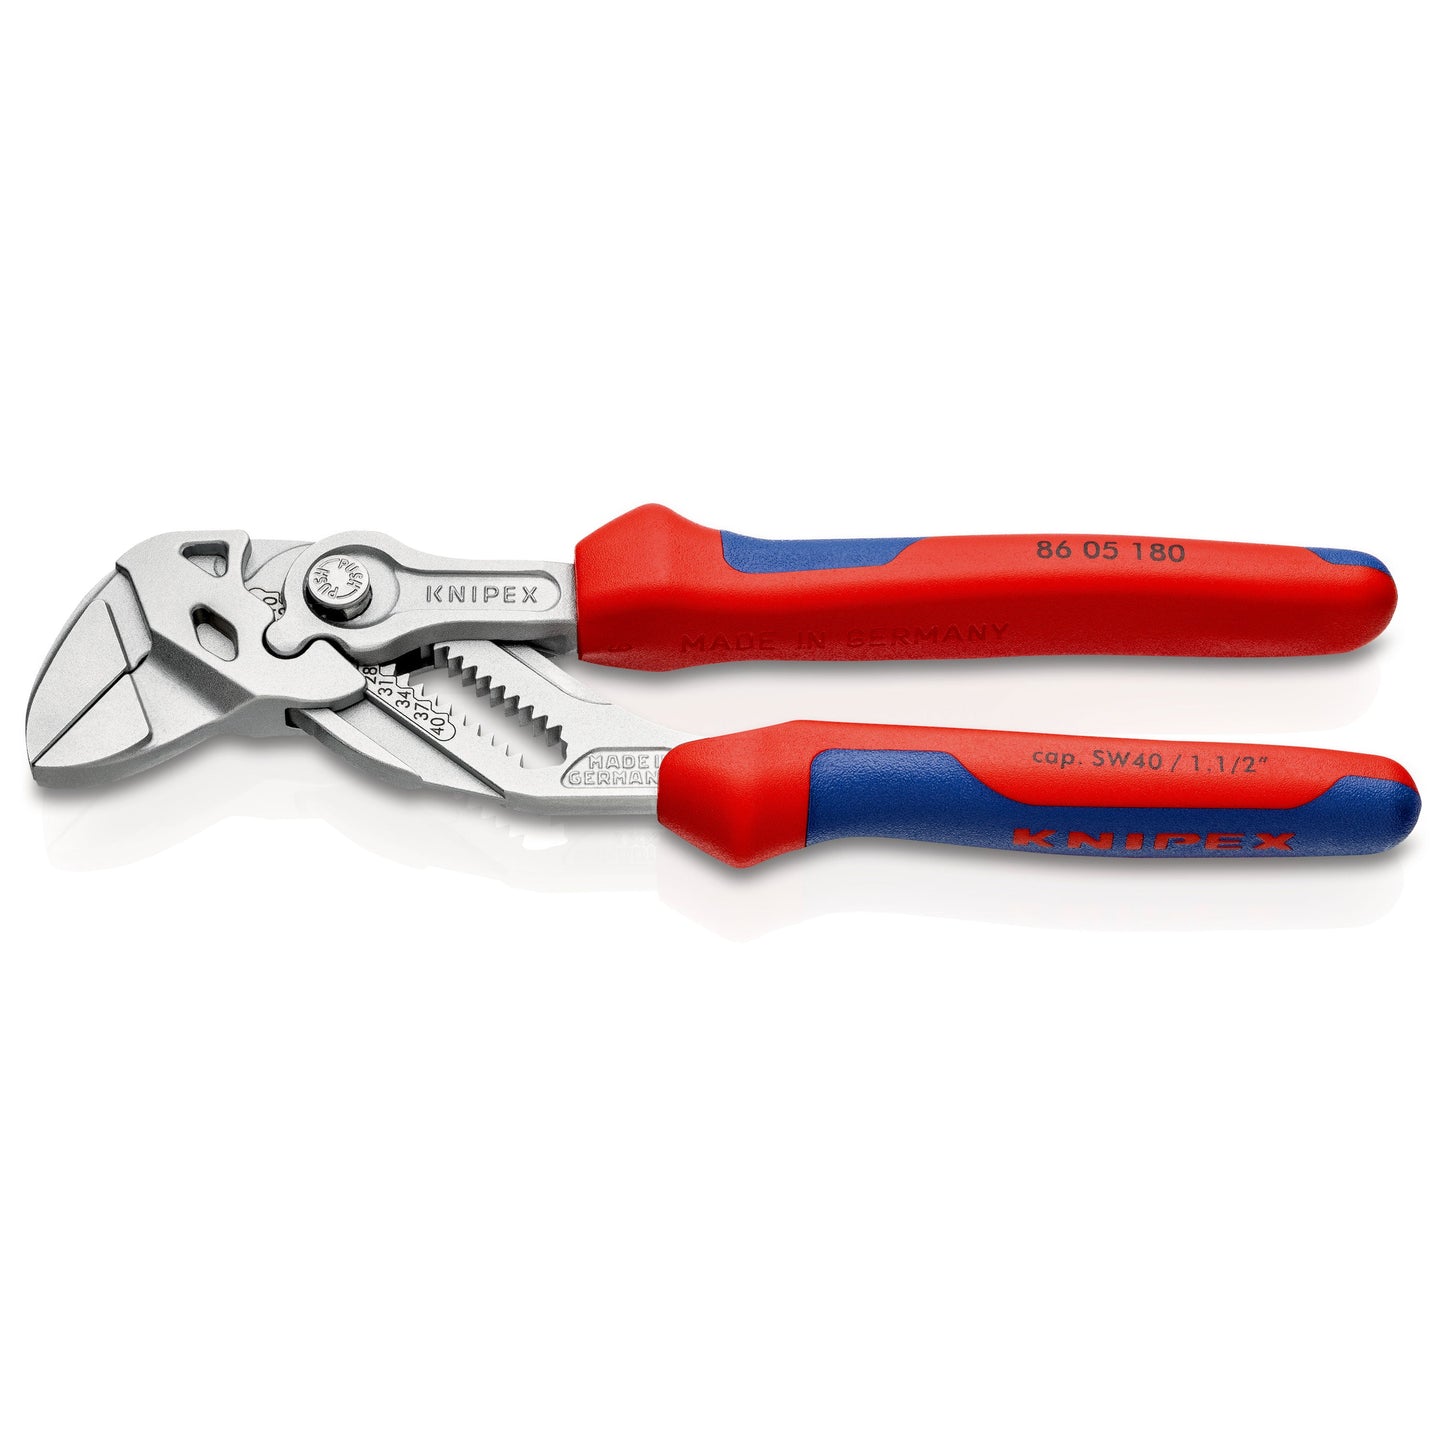 Knipex 86 05 180 - 180 mm wrench pliers with two-component handles